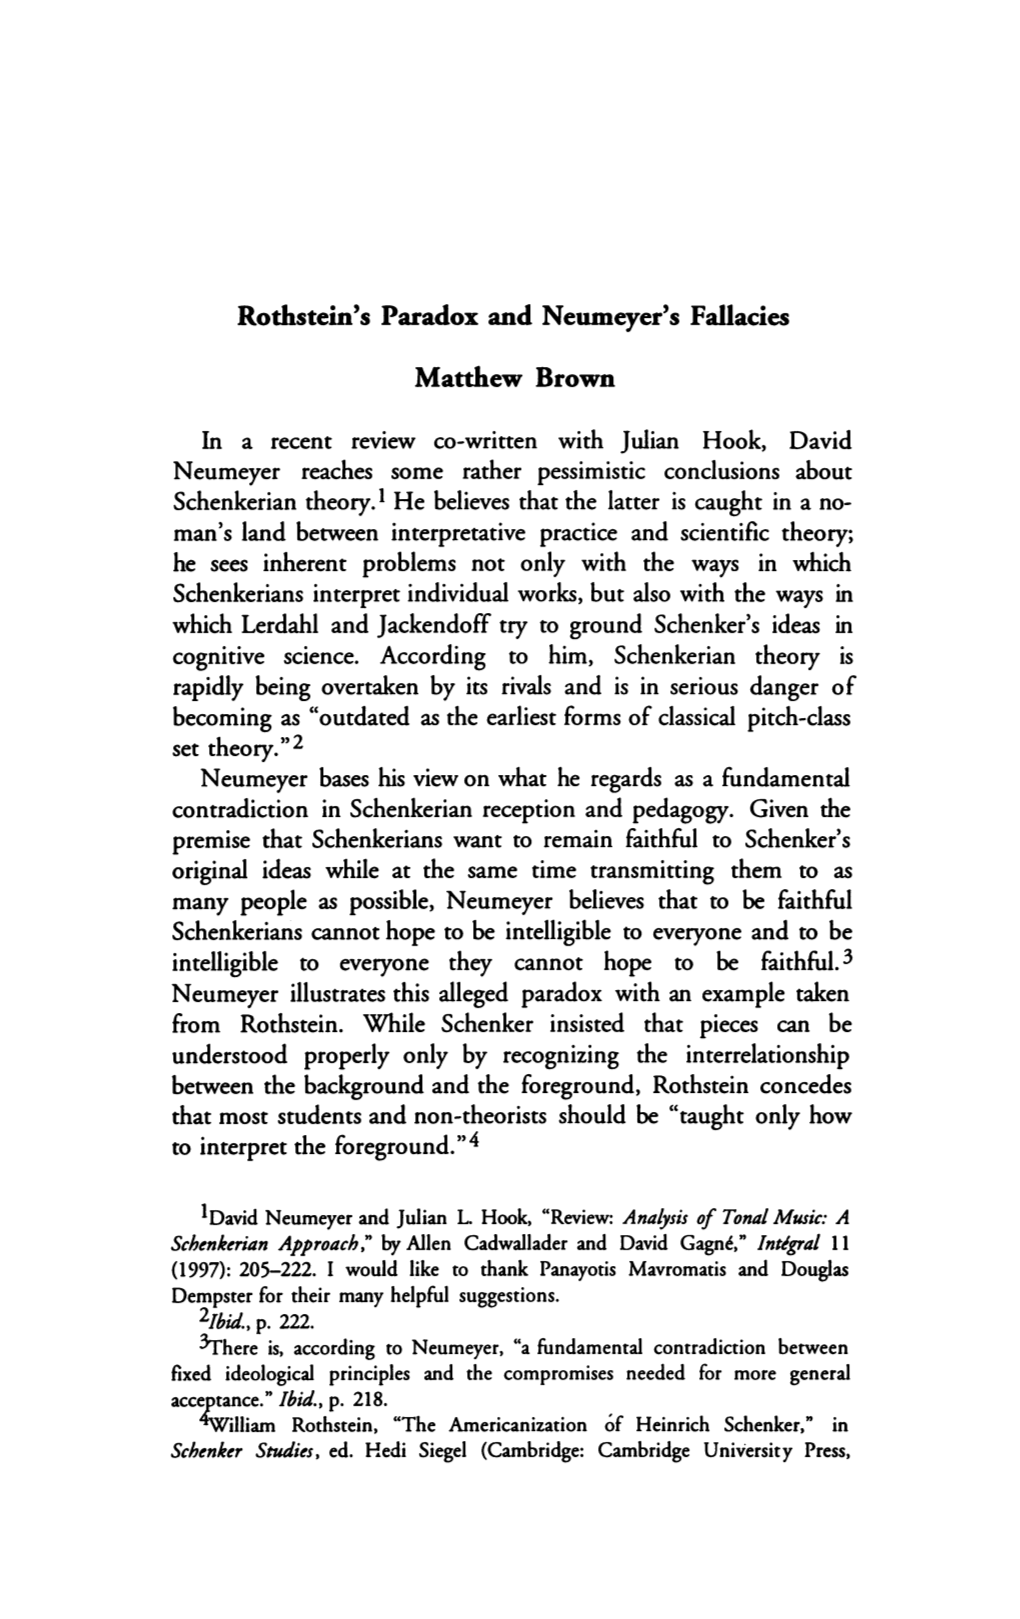 Rothstein's Paradox and Neumeyer's Fallacies